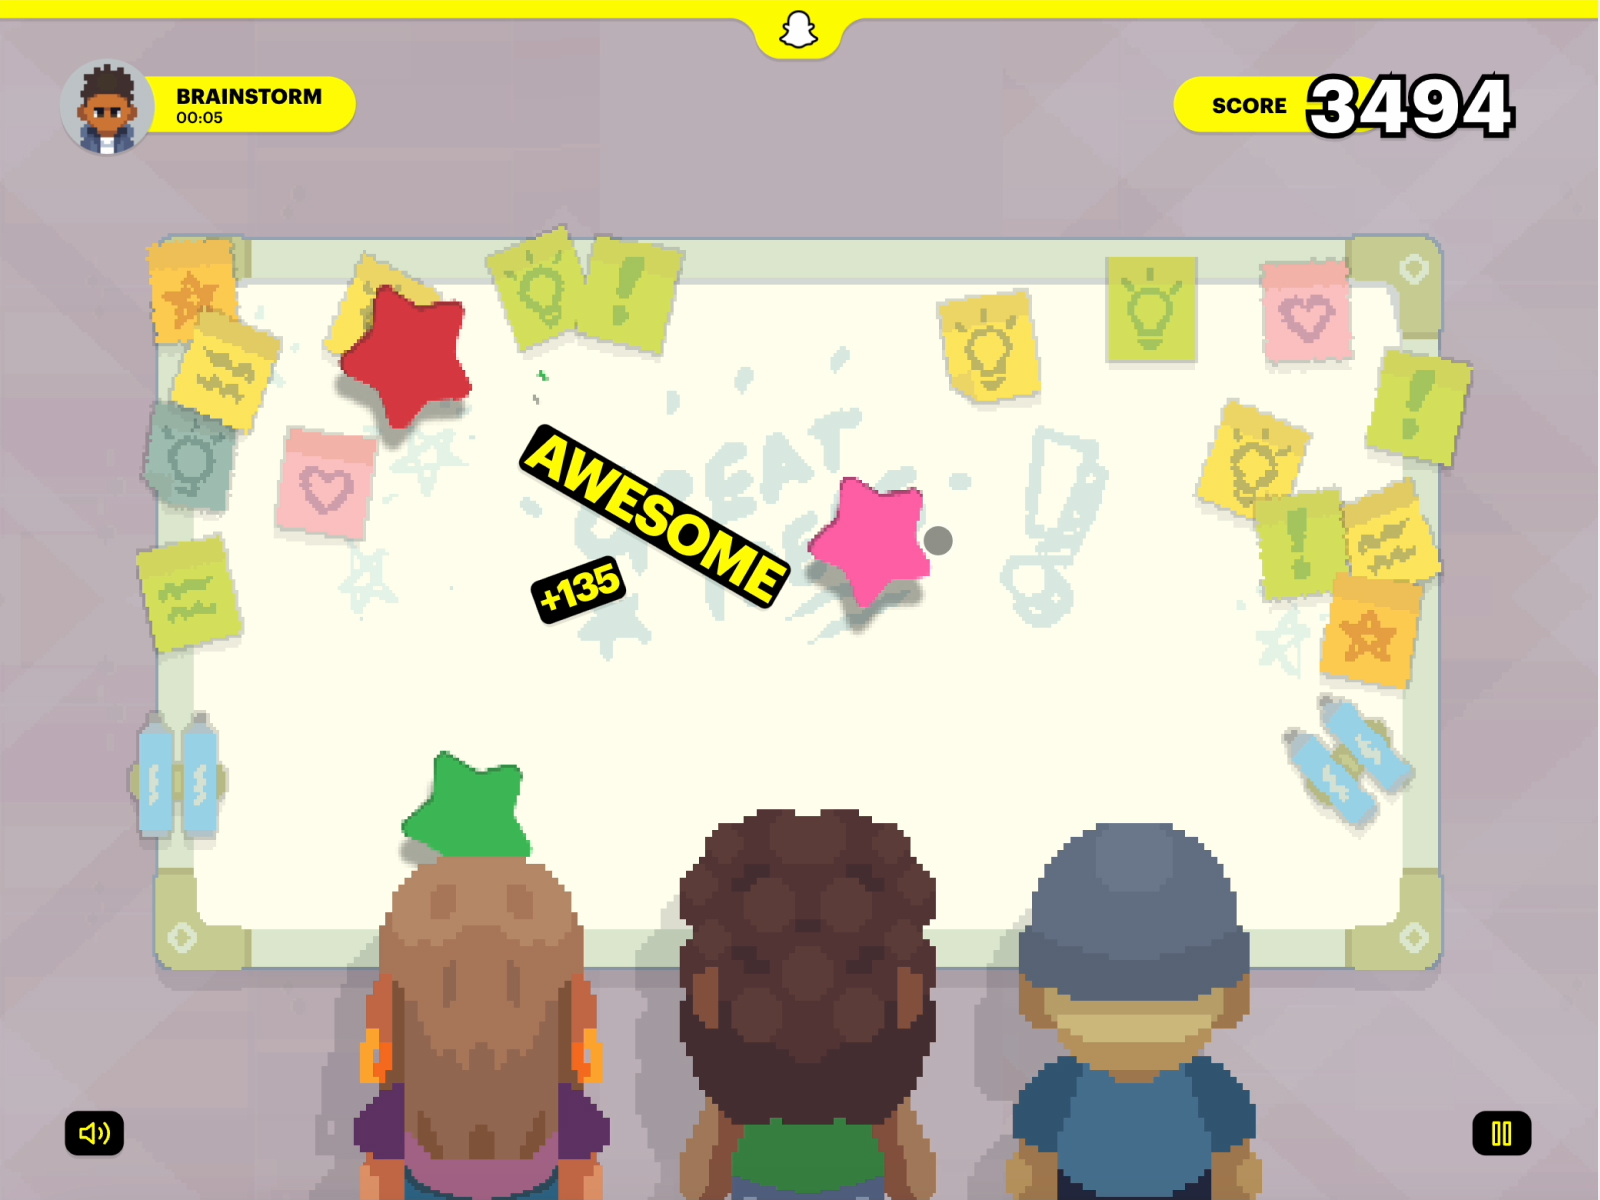 The game's content is based on a series of mini-challenges reminiscent of agency life—this brainstorm sesh, for example.